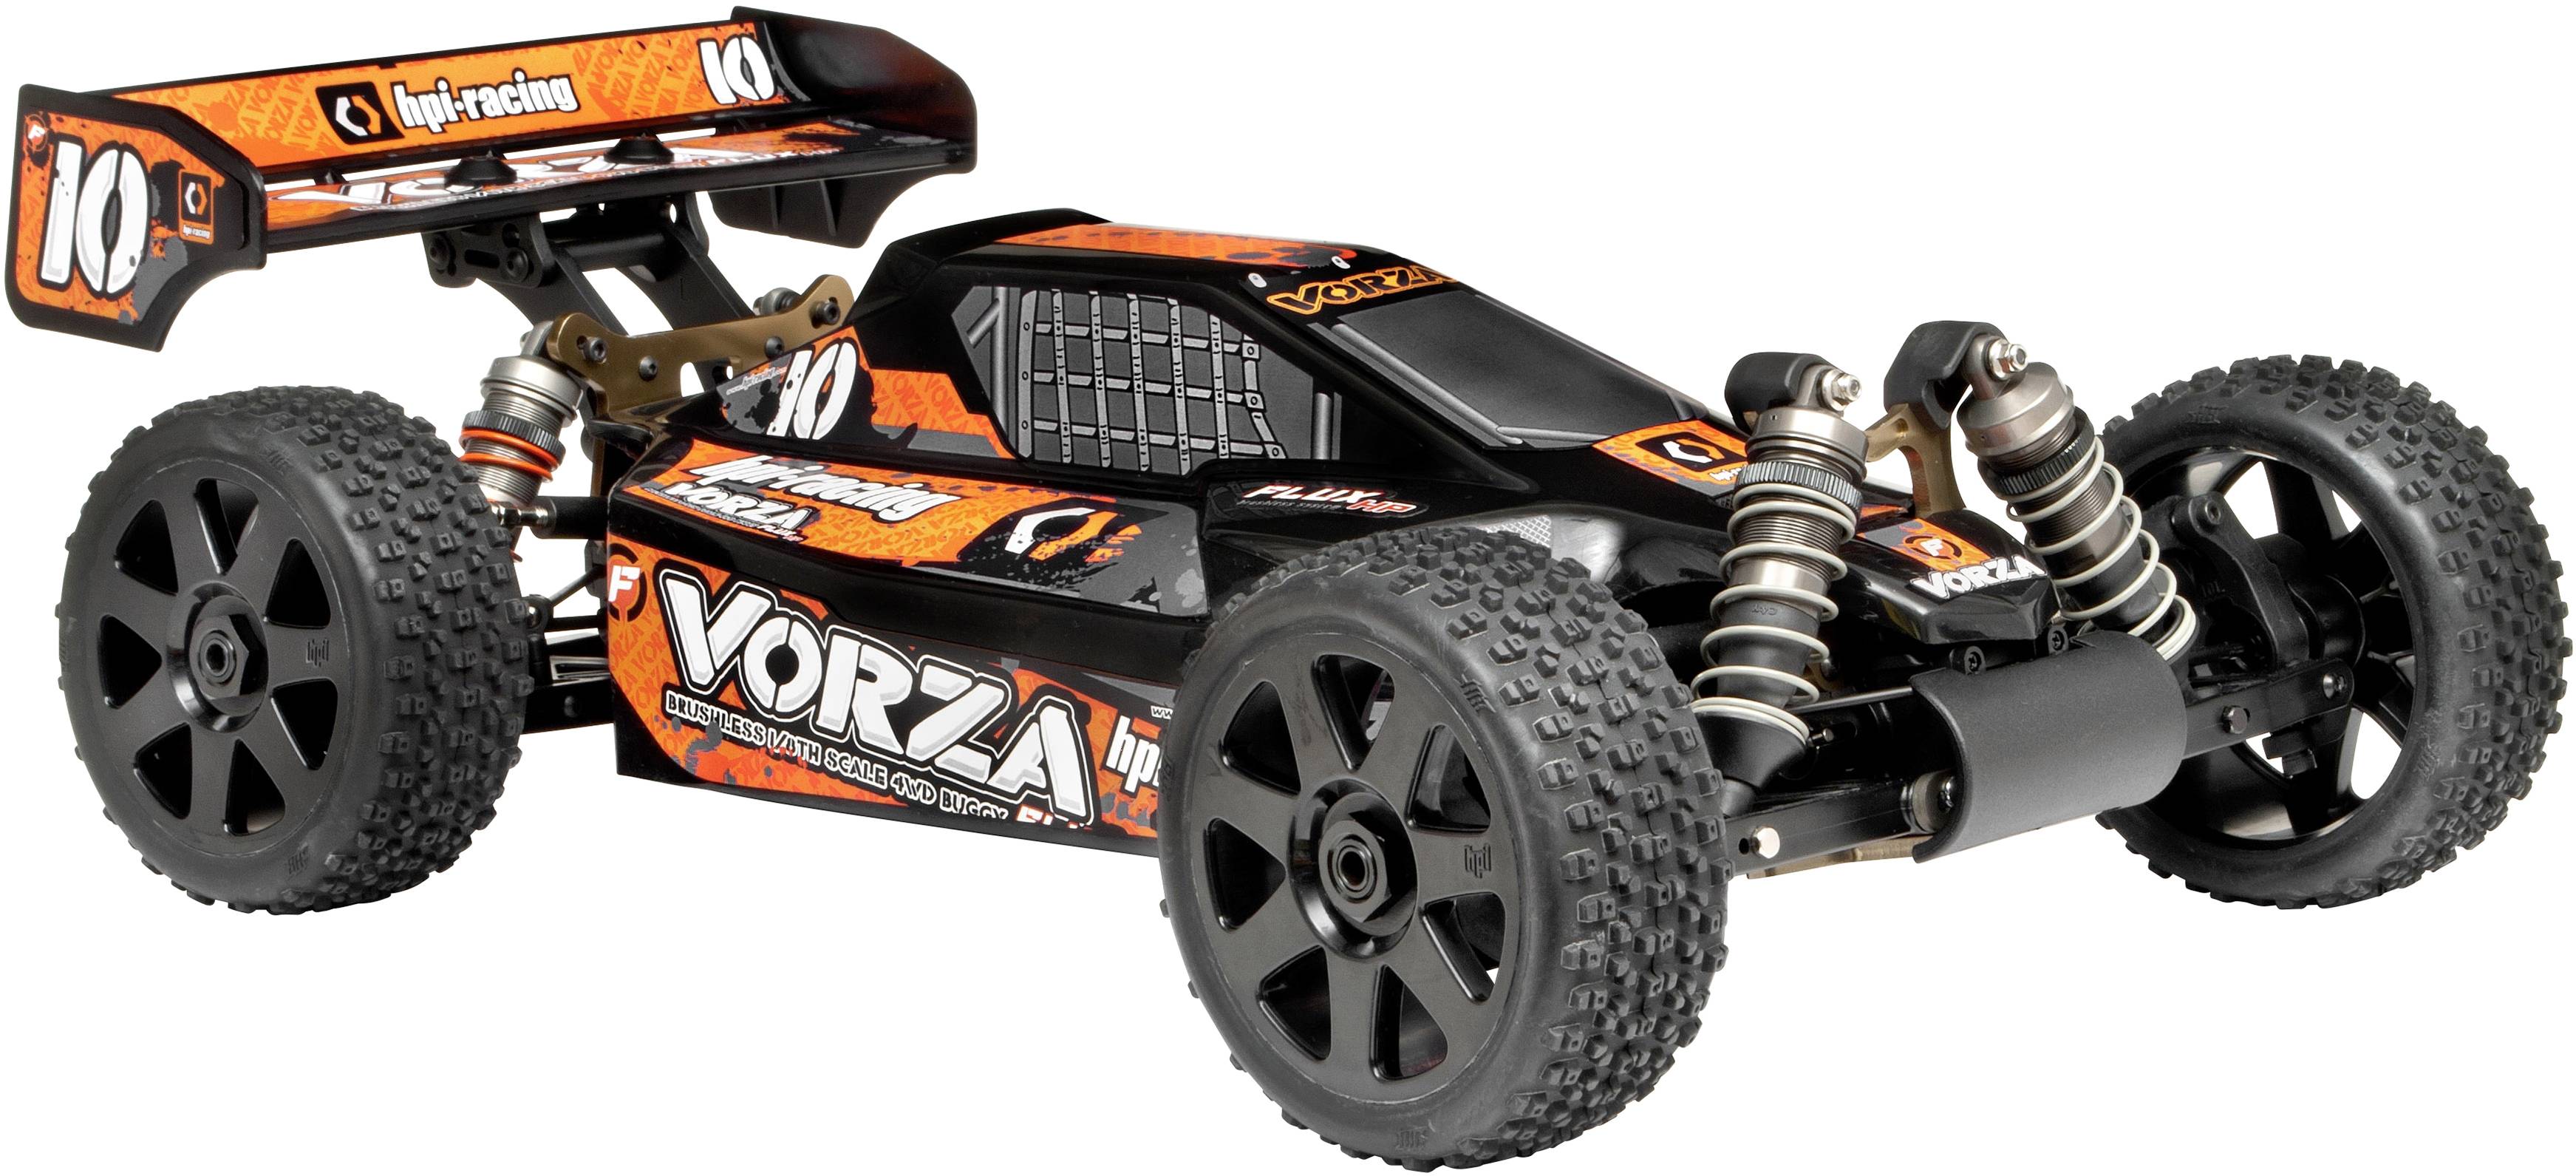 HPI Racing Vorza Flux 255:255 255WD Elektro Buggy Brushless 255:255 RC model car  Electric Buggy 255WD RtR 25,255 GHz